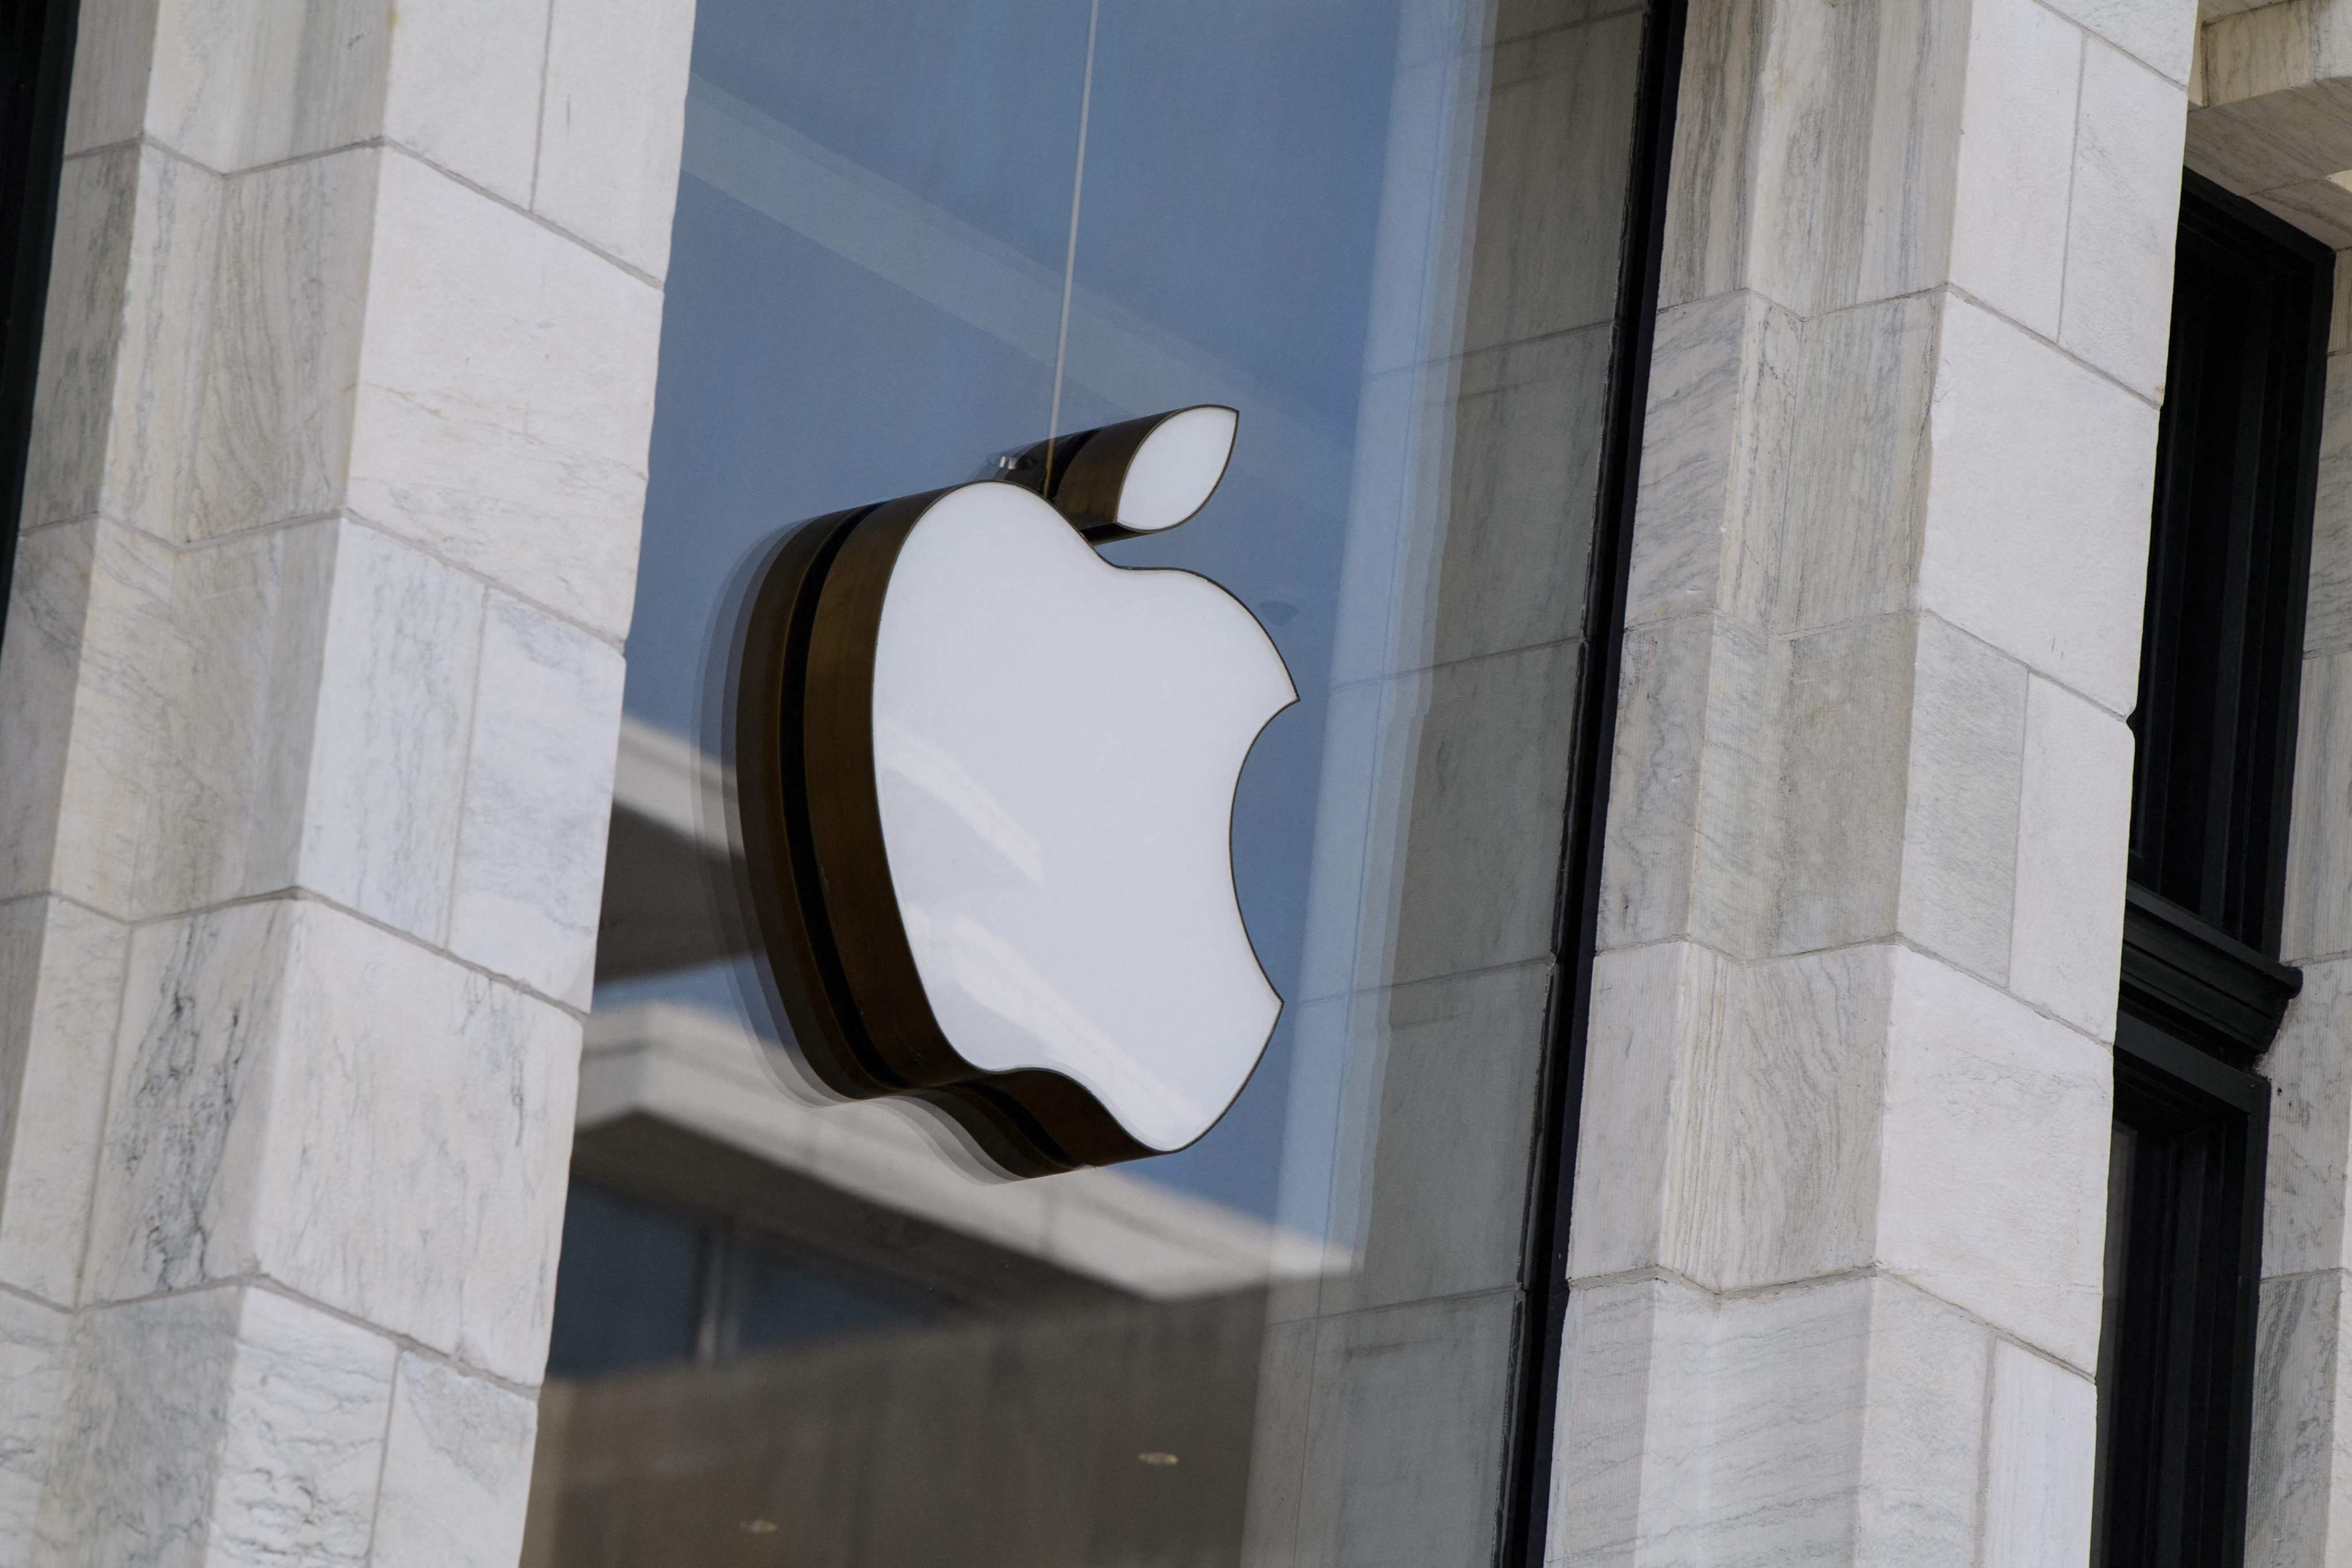 The Apple logo is seen at the entrance of the company's store in Washington on September 14, 2021. Photo: AFP